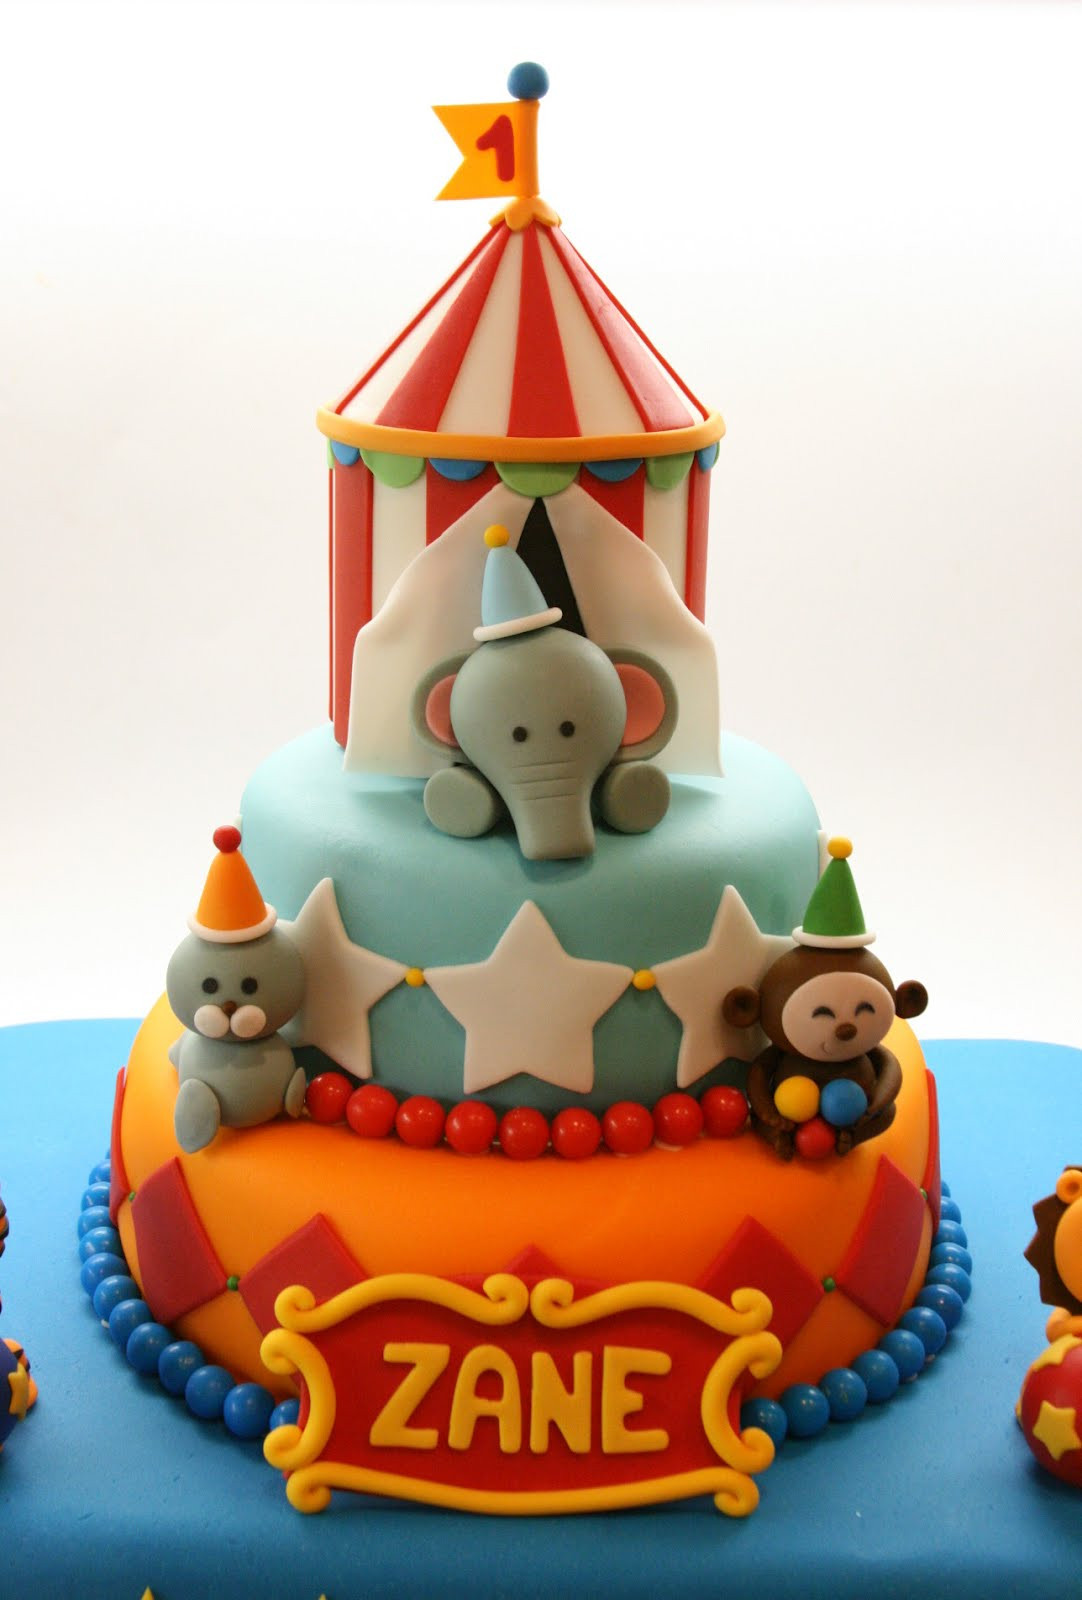 Carnival Birthday Cakes
 Circus Party on Pinterest